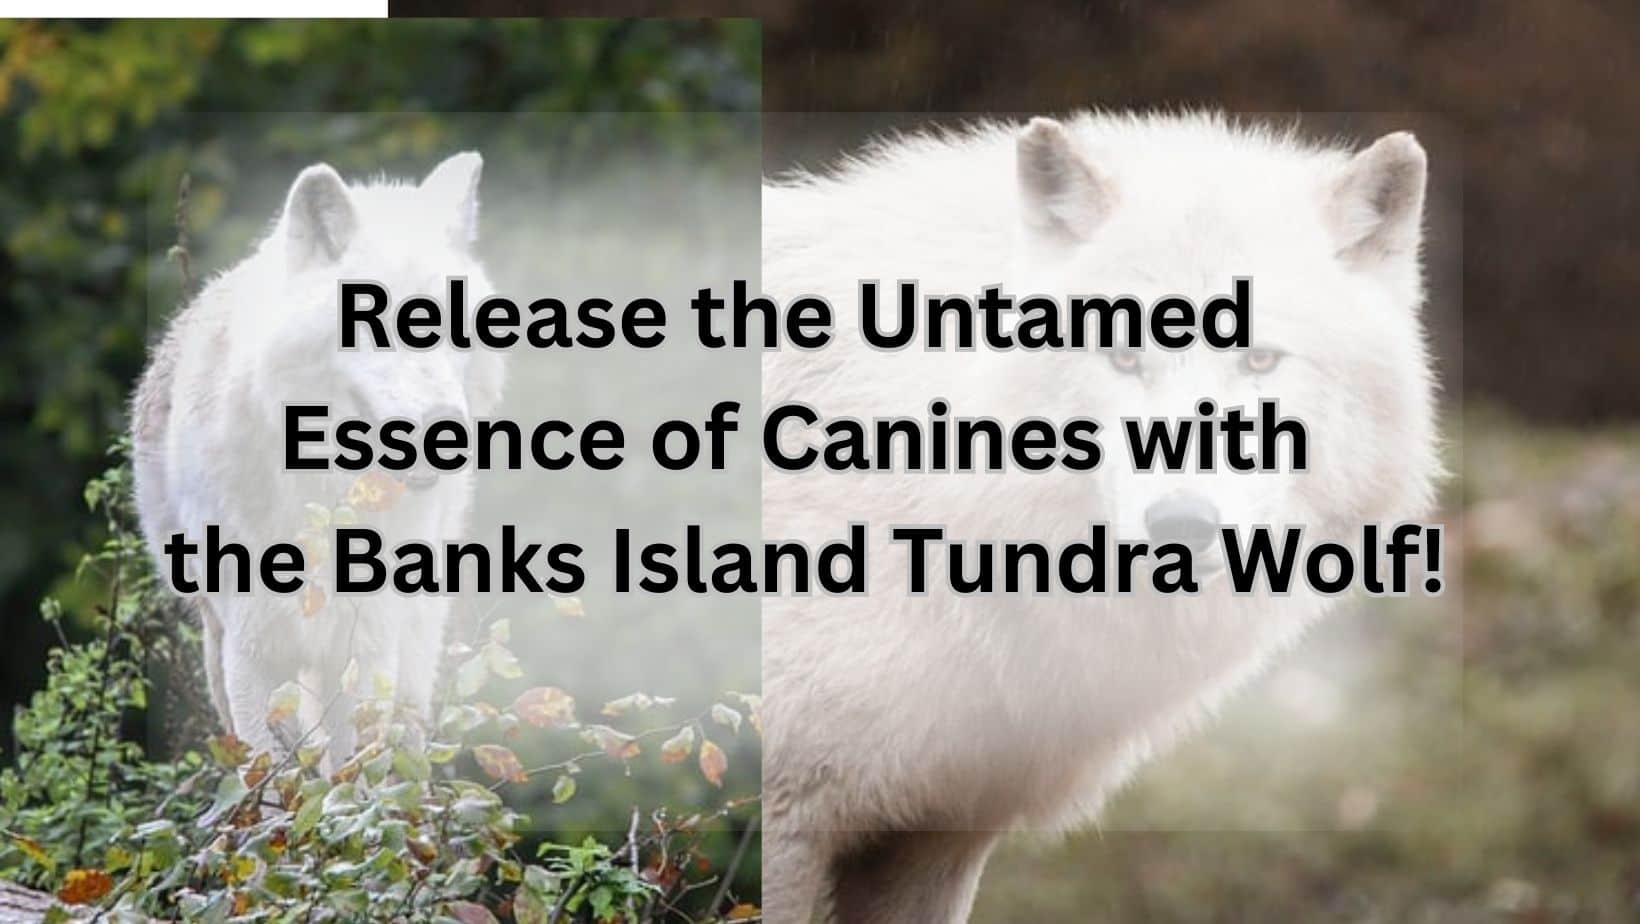 Release the Untamed Essence of Canines with the Banks Island Tundra Wolf!